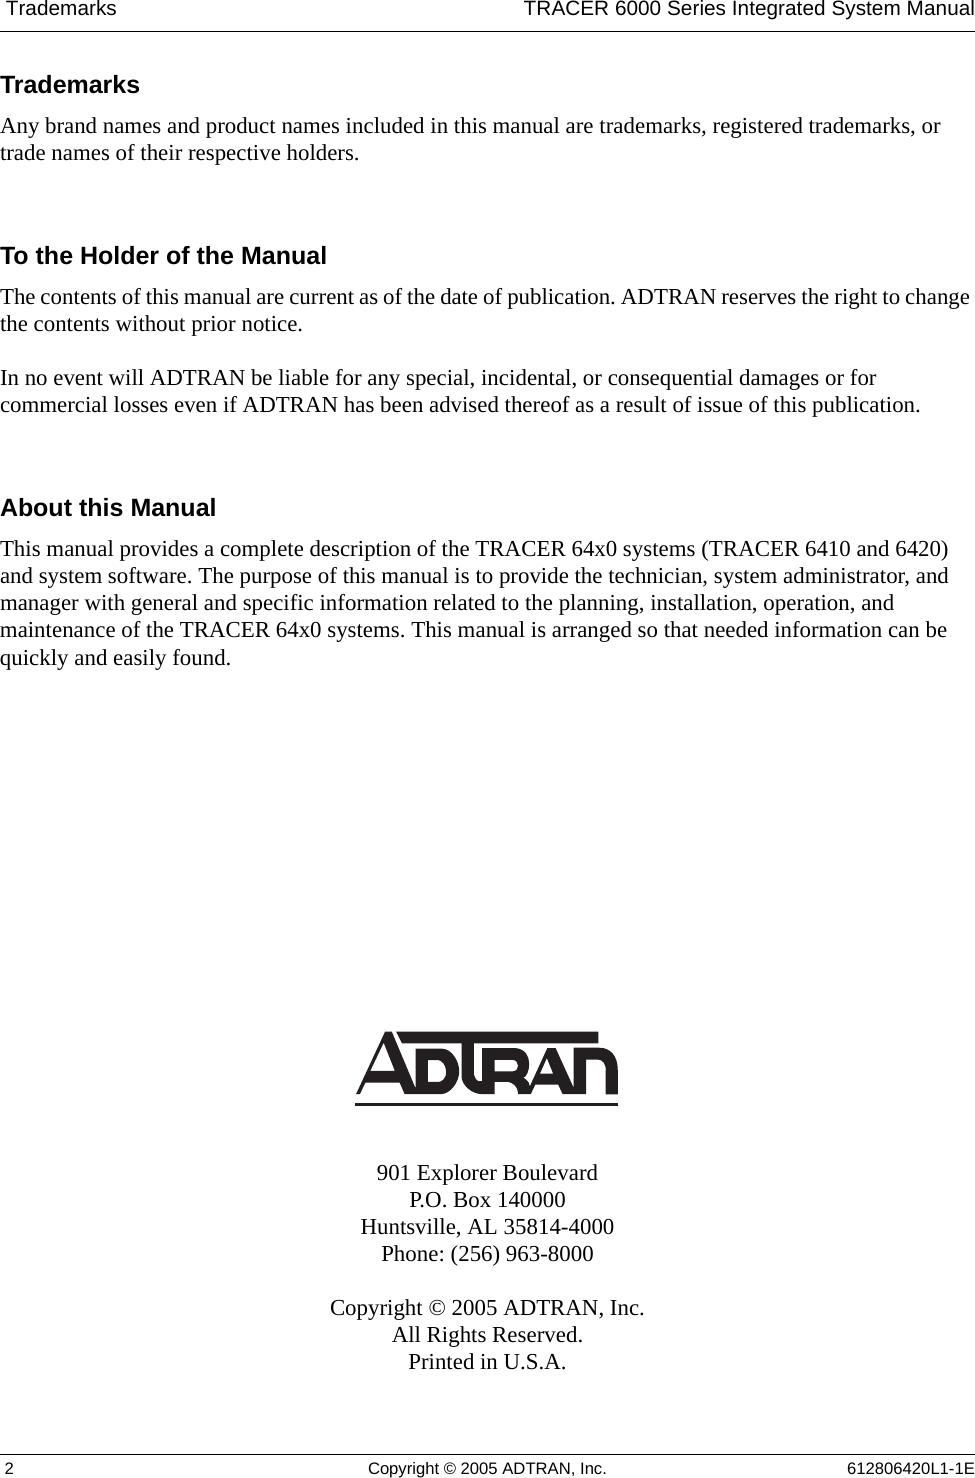  Trademarks TRACER 6000 Series Integrated System Manual 2 Copyright © 2005 ADTRAN, Inc. 612806420L1-1ETrademarksAny brand names and product names included in this manual are trademarks, registered trademarks, or trade names of their respective holders.To the Holder of the ManualThe contents of this manual are current as of the date of publication. ADTRAN reserves the right to change the contents without prior notice.In no event will ADTRAN be liable for any special, incidental, or consequential damages or for commercial losses even if ADTRAN has been advised thereof as a result of issue of this publication.About this ManualThis manual provides a complete description of the TRACER 64x0 systems (TRACER 6410 and 6420) and system software. The purpose of this manual is to provide the technician, system administrator, and manager with general and specific information related to the planning, installation, operation, and maintenance of the TRACER 64x0 systems. This manual is arranged so that needed information can be quickly and easily found. 901 Explorer BoulevardP.O. Box 140000Huntsville, AL 35814-4000Phone: (256) 963-8000Copyright © 2005 ADTRAN, Inc.All Rights Reserved.Printed in U.S.A.